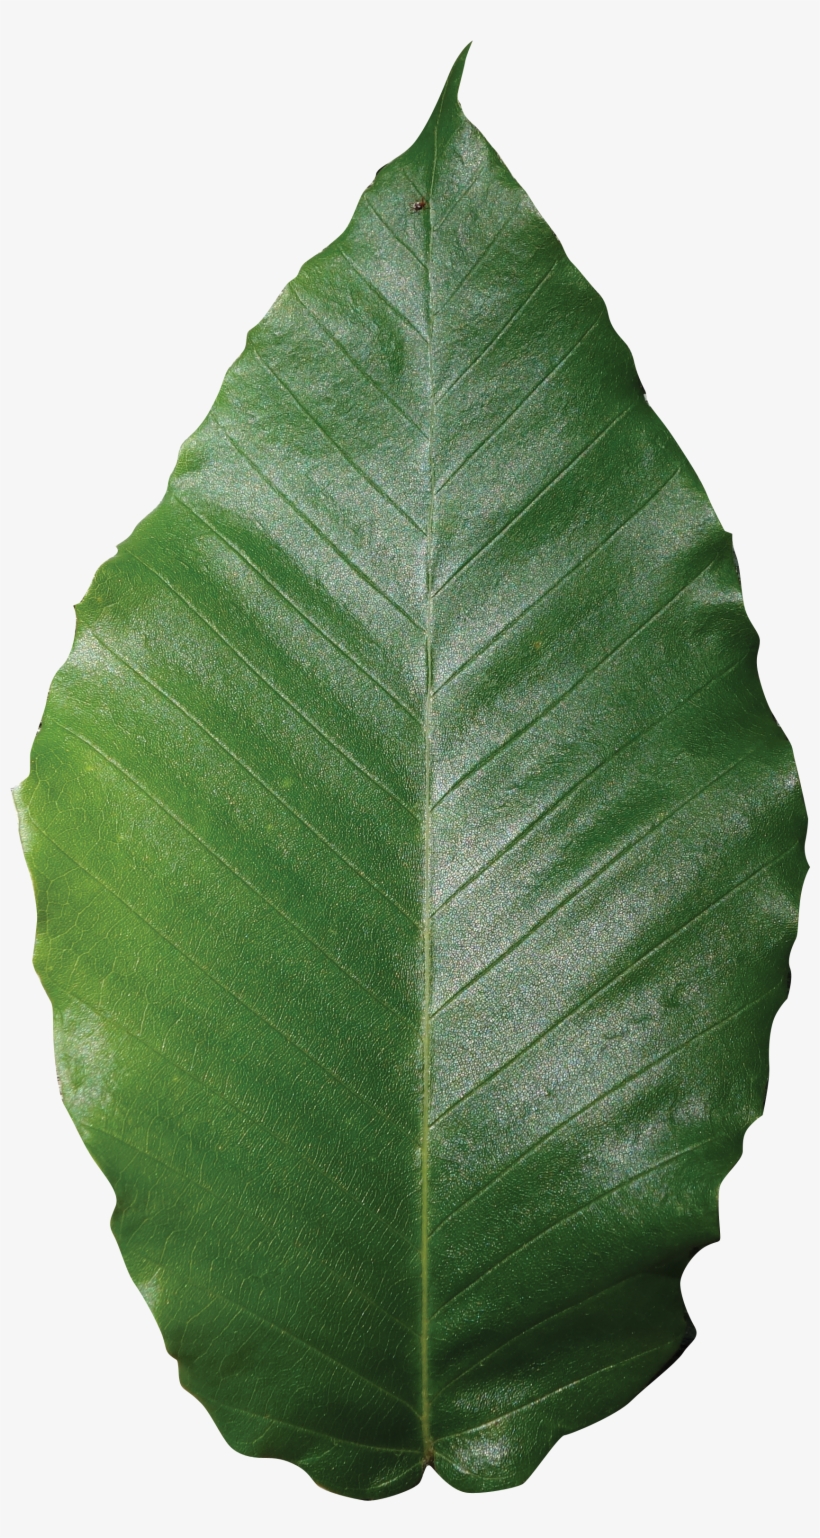 American Beech Friends Of The Louisiana State Arboretum - Orange Fruit Leaf Png, transparent png #4102746